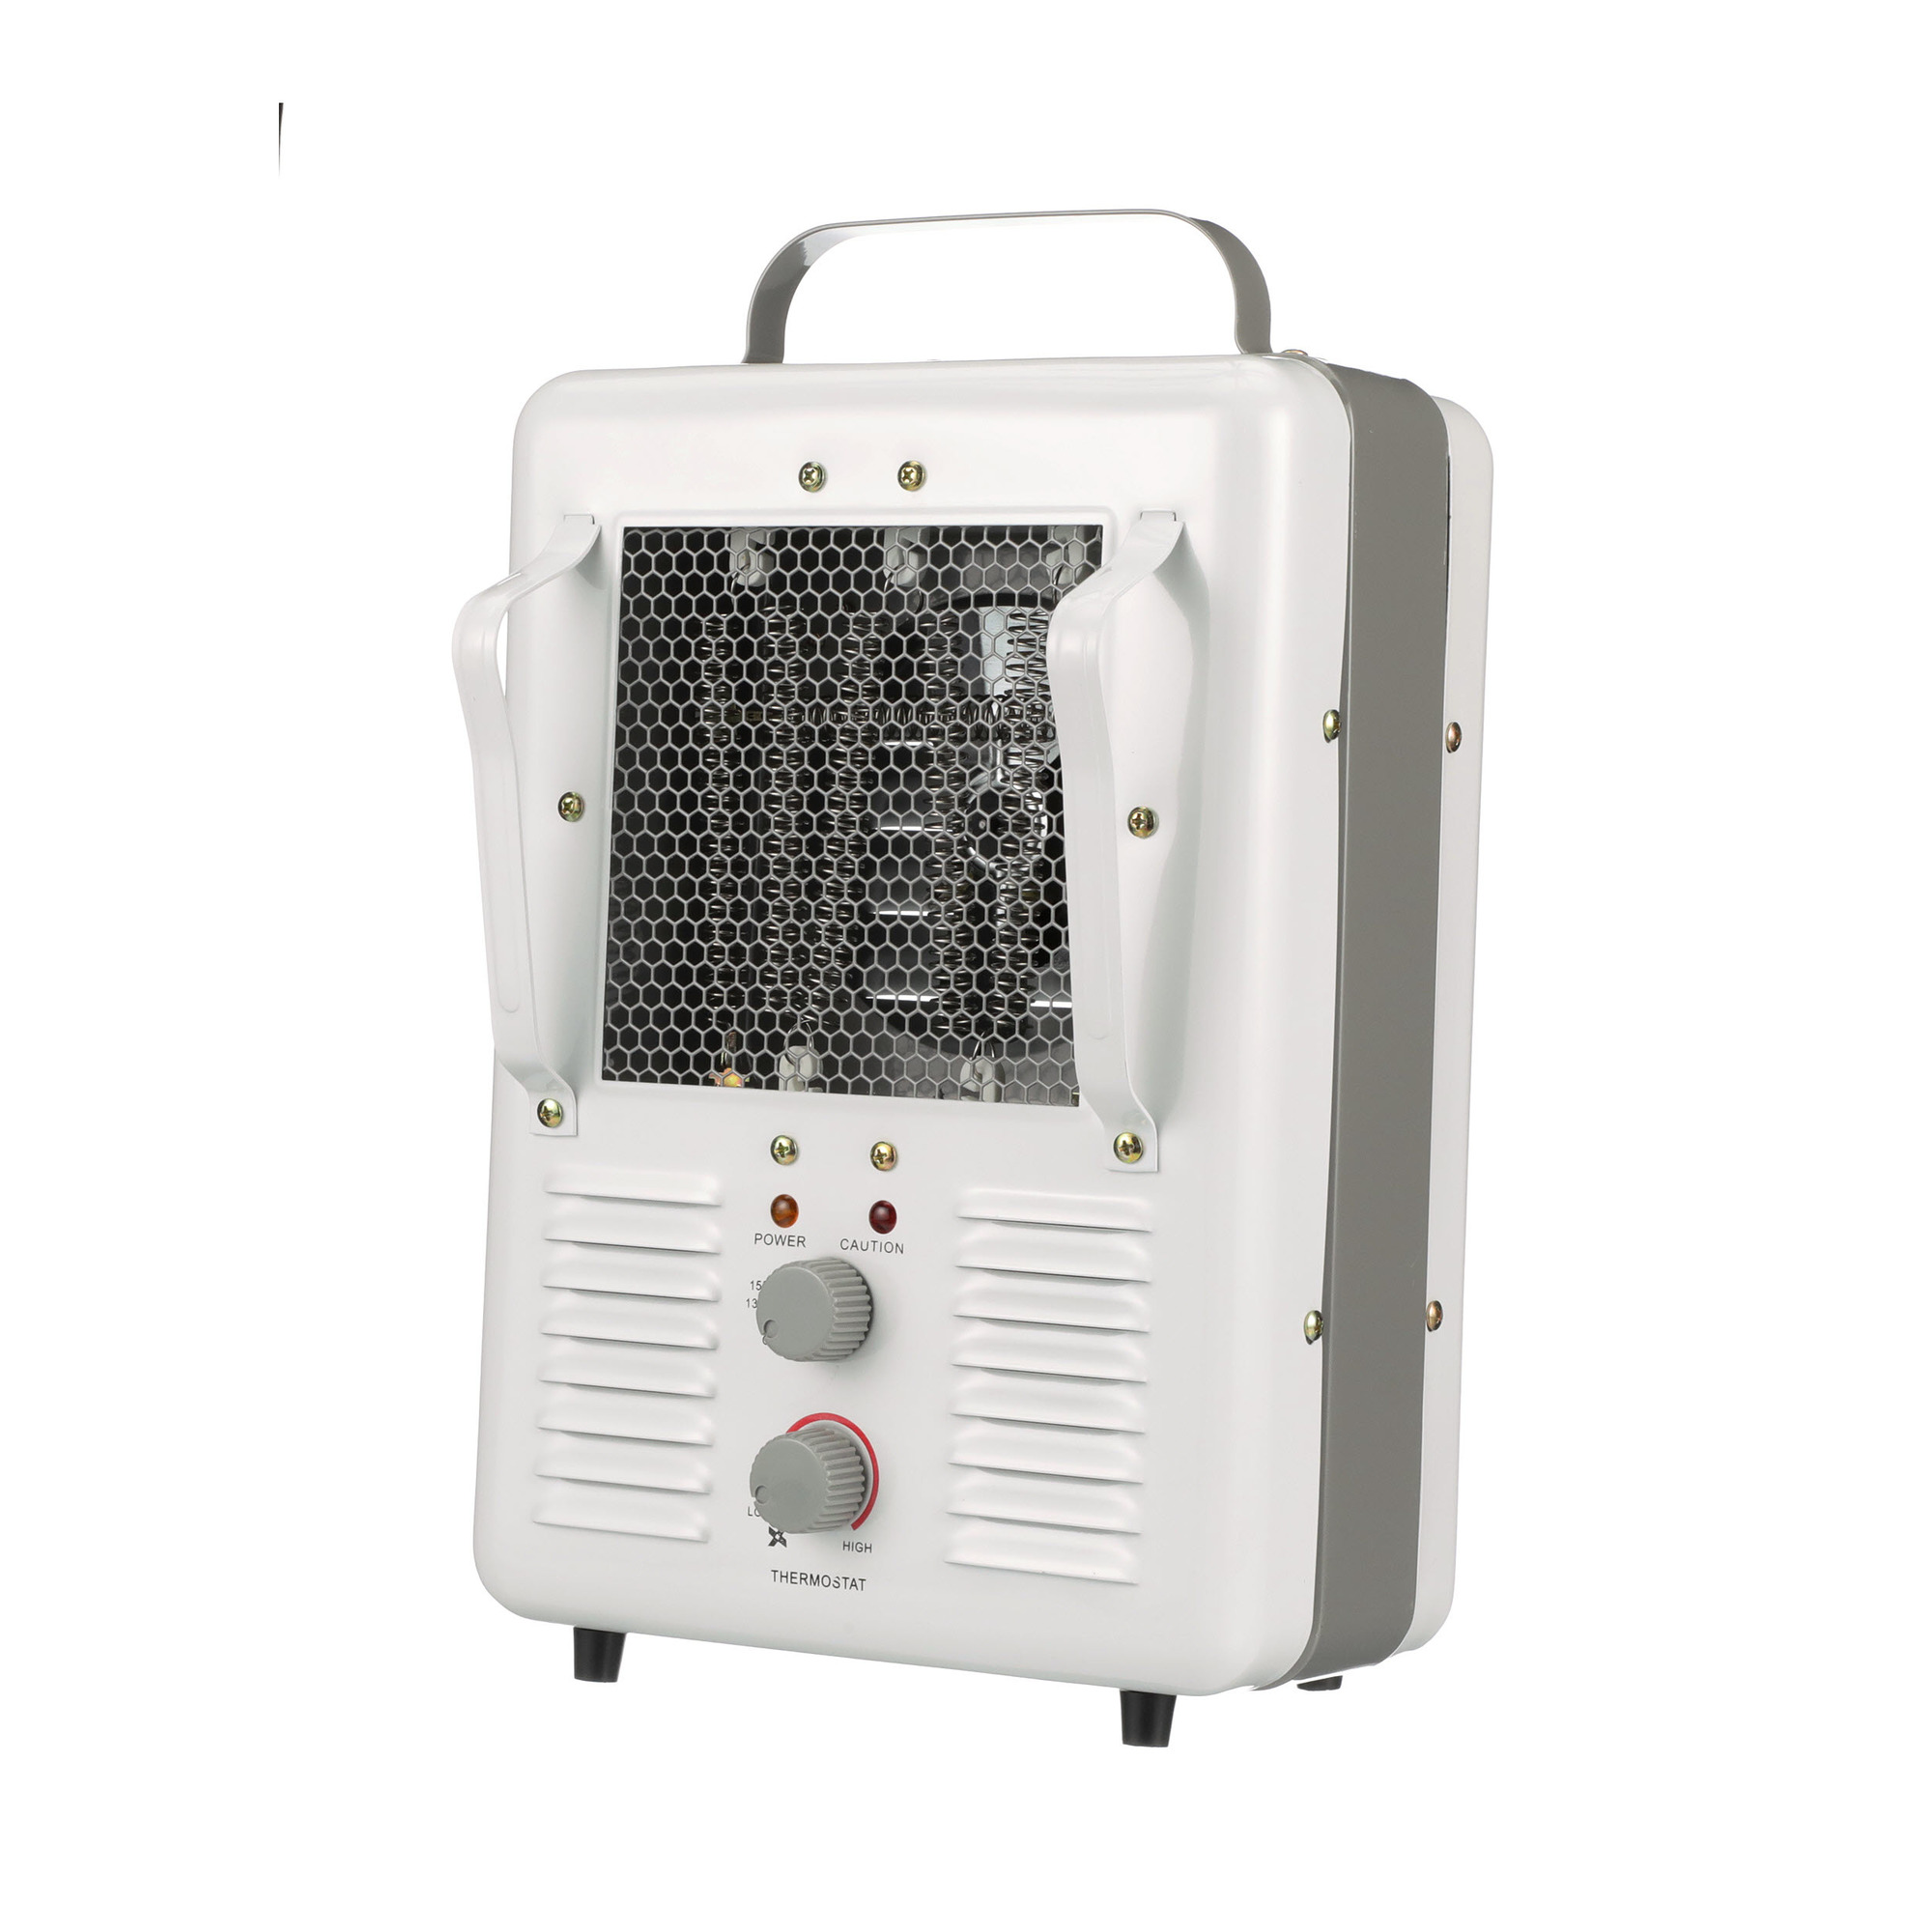 TPI Markel, Portable Electric Milkhouse Indoor Heater, Heat Type Forced Air, Heat Output 5120 Btu/hour, Heating Capability 125 ftÂ², Model 188-TASA